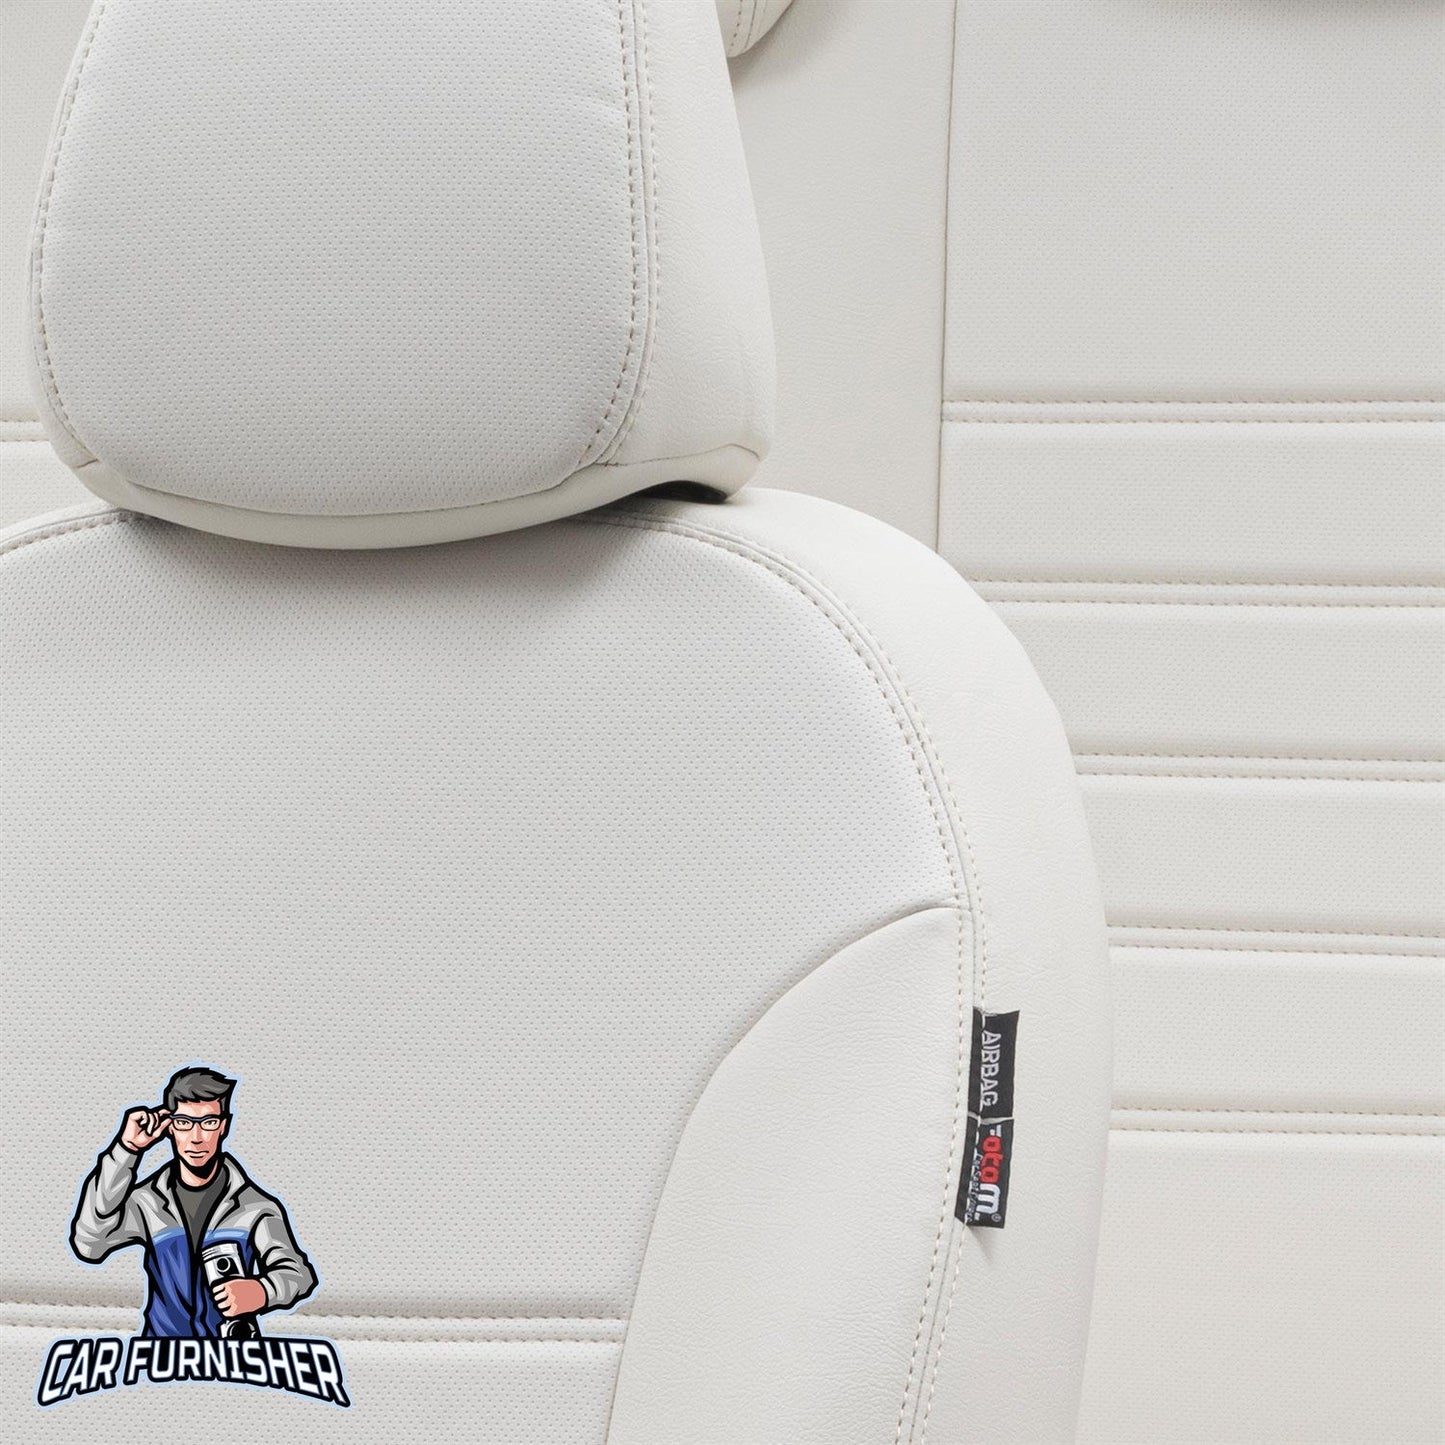 Mercedes A Class Seat Covers Istanbul Leather Design Ivory Leather